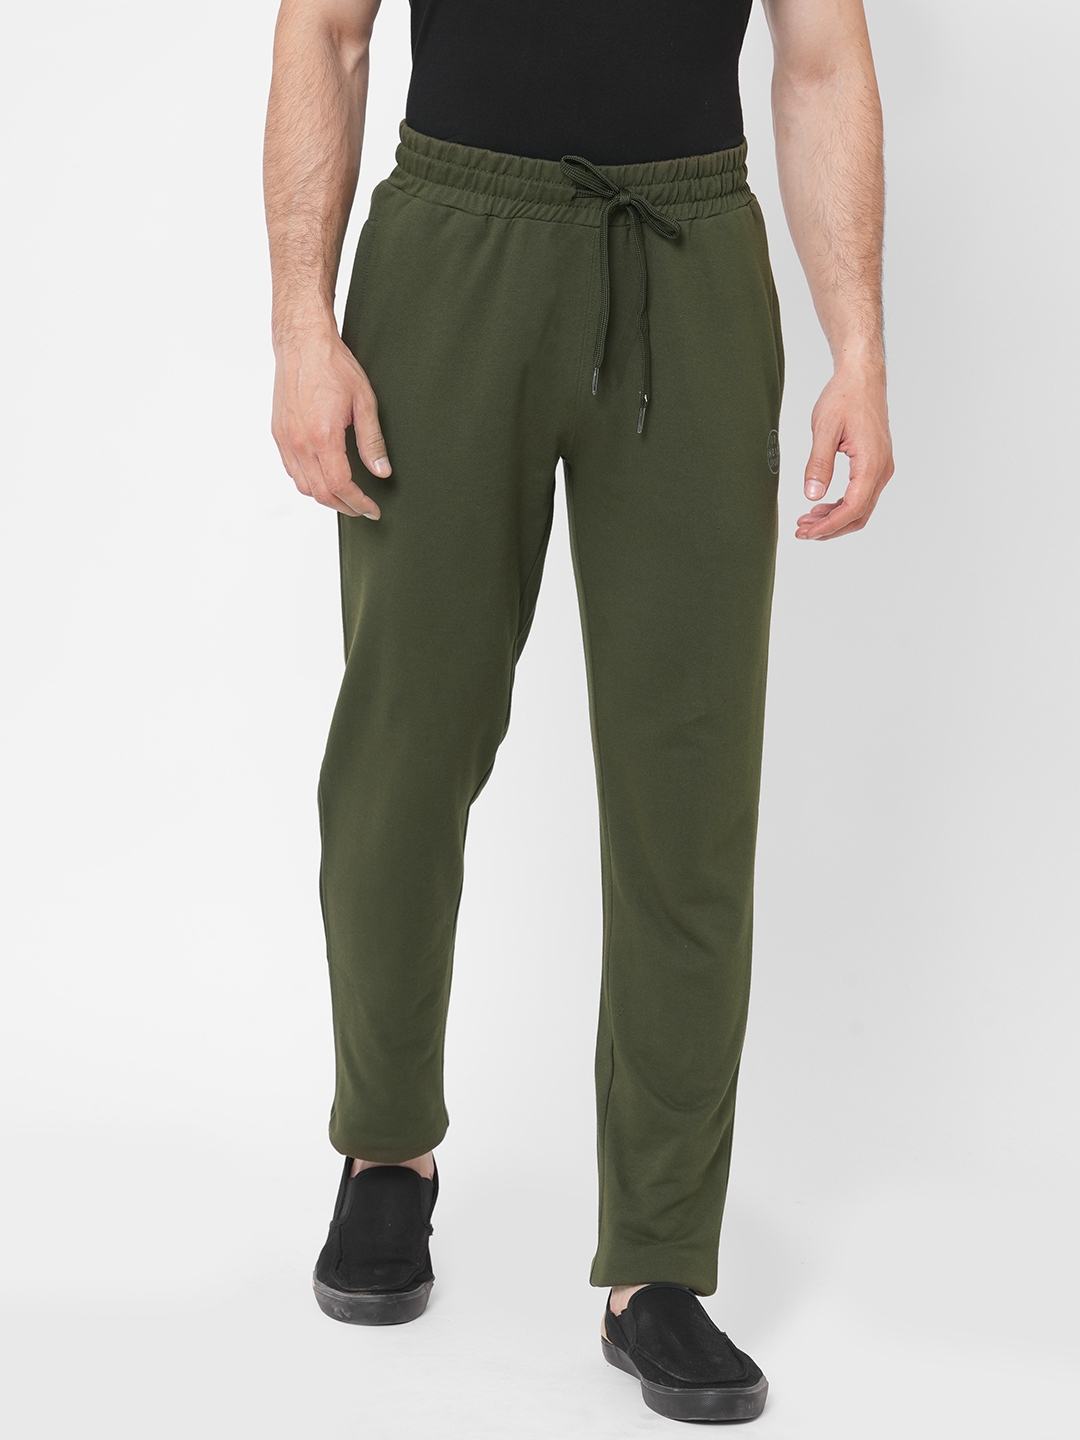 Buy HEAD Solid Polyester Cotton Slim Fit Men's Track Pants | Shoppers Stop